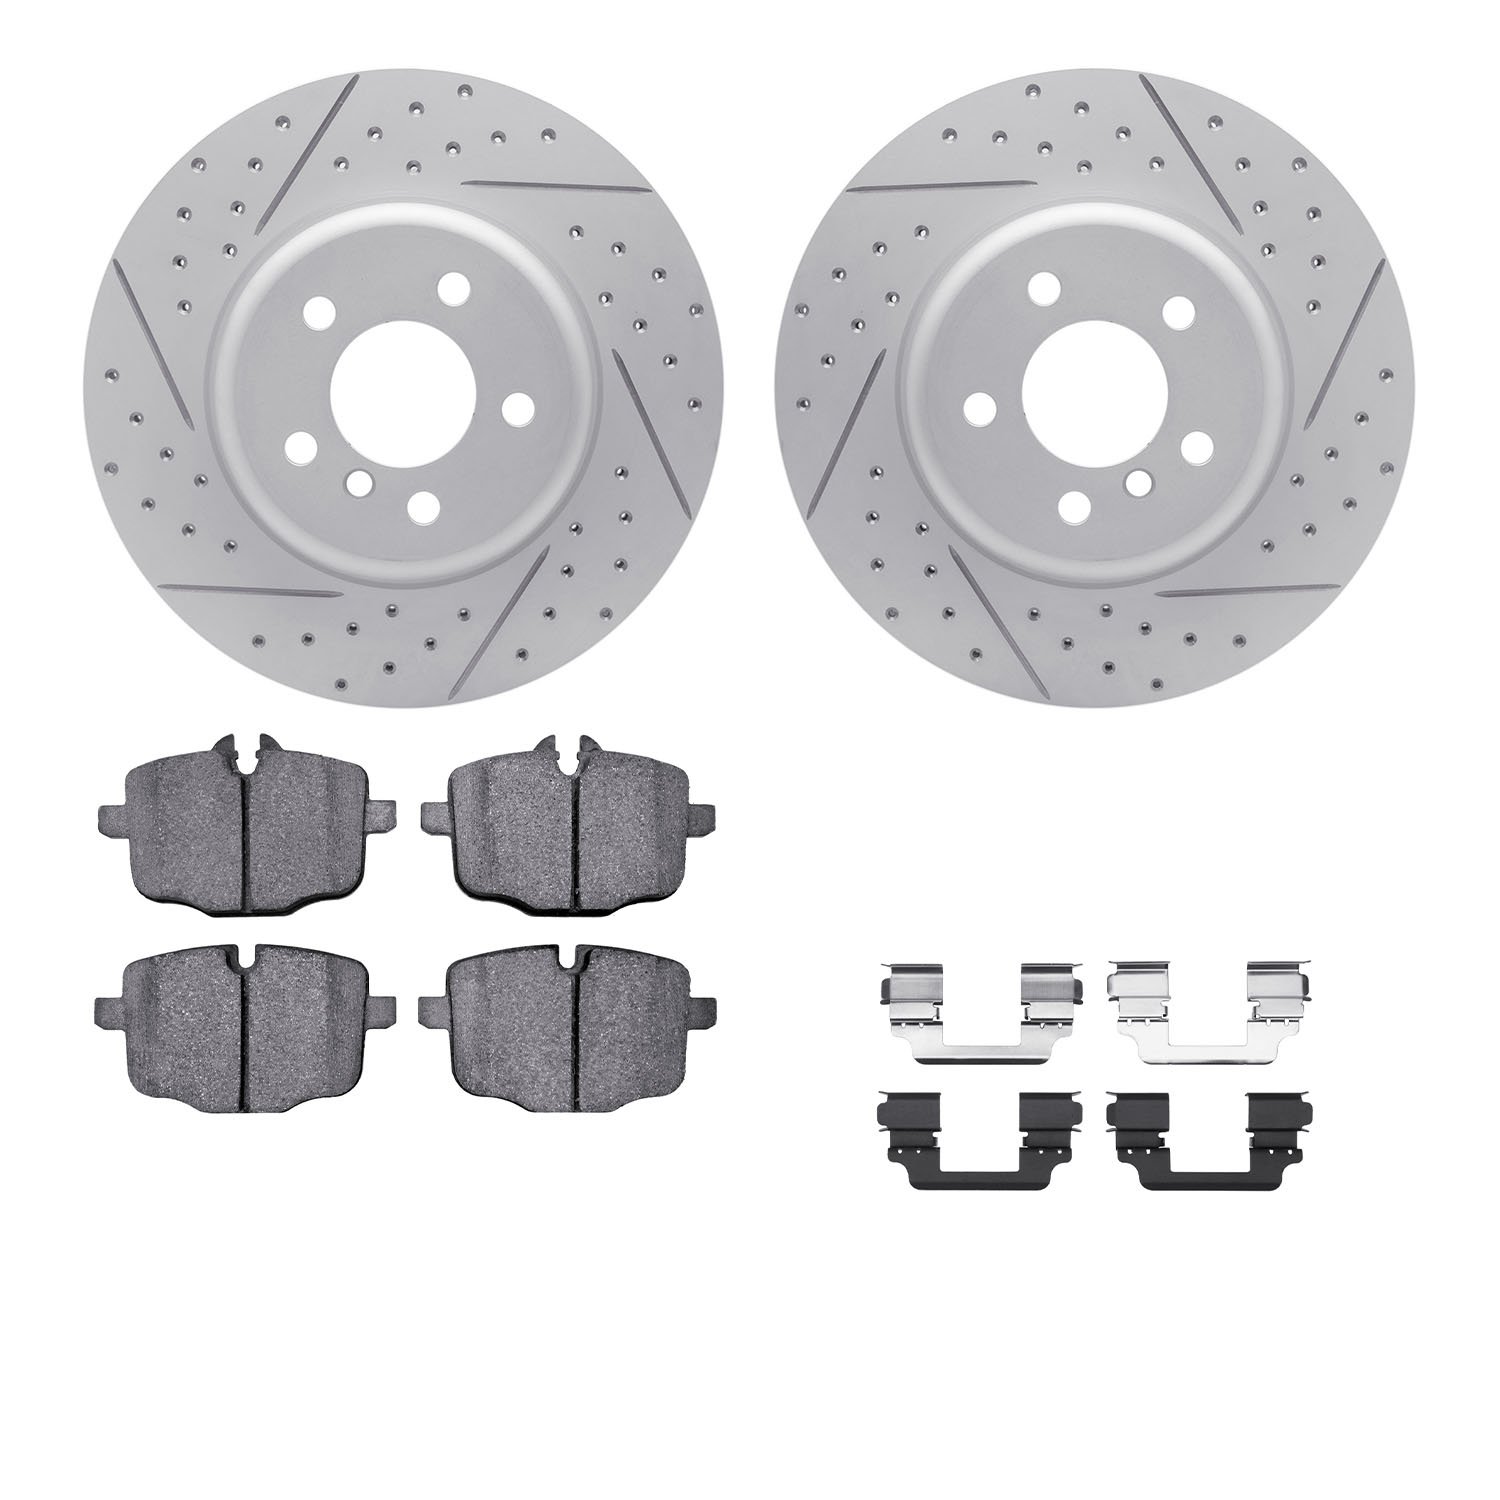 2512-31076 Geoperformance Drilled/Slotted Rotors w/5000 Advanced Brake Pads Kit & Hardware, 2015-2015 BMW, Position: Rear